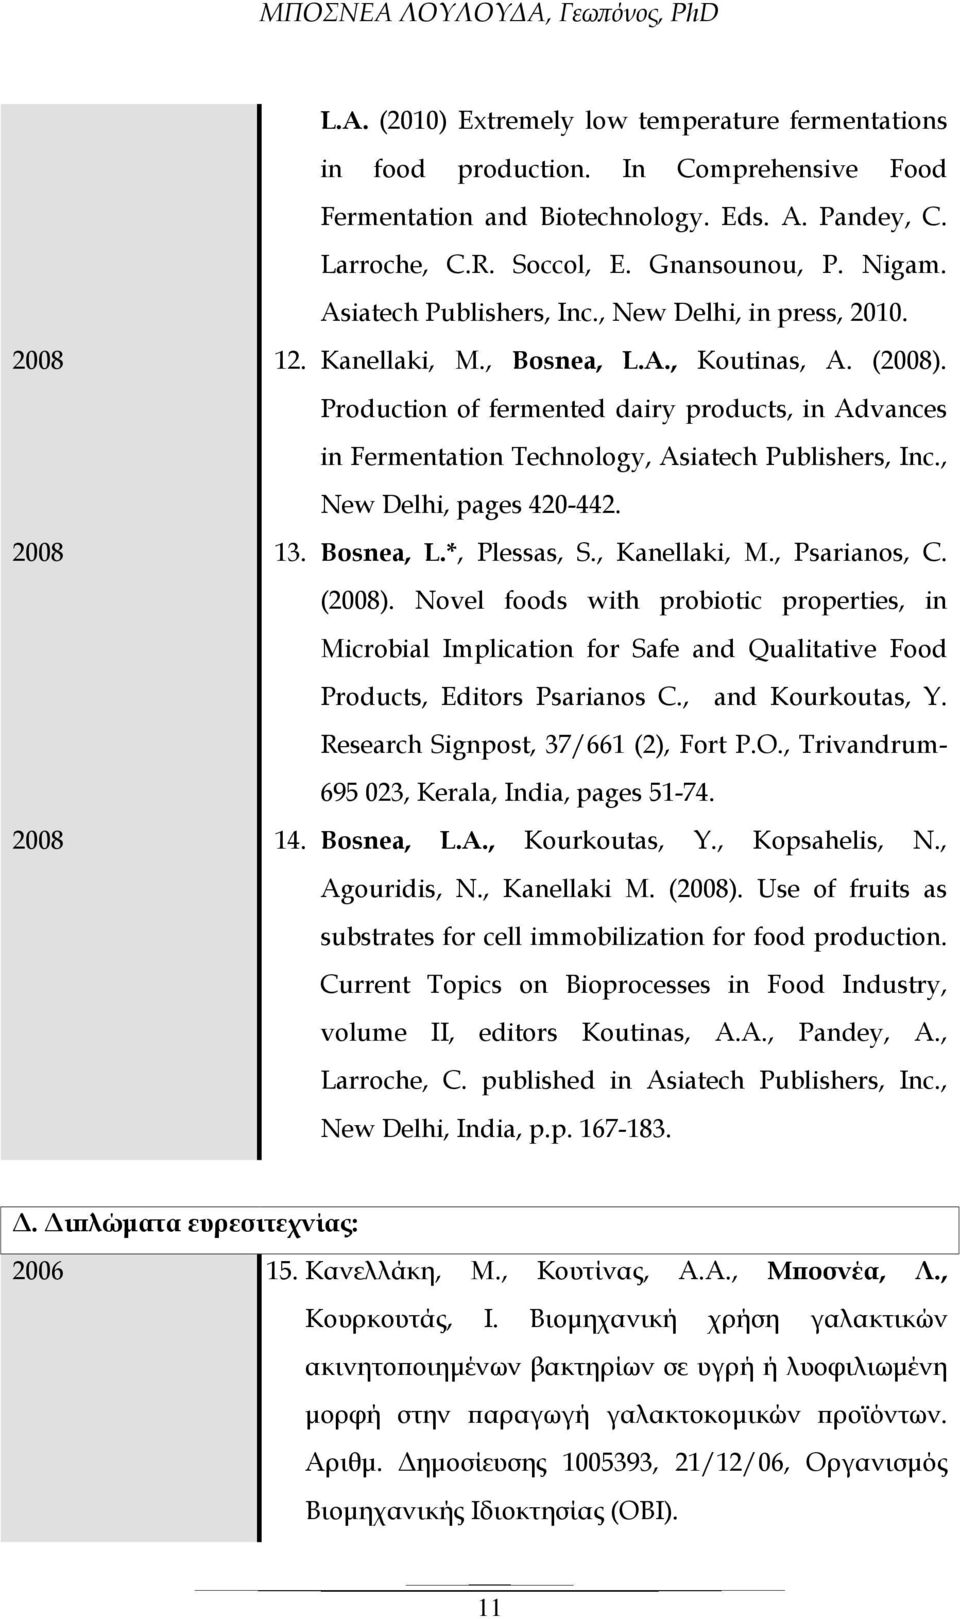 Production of fermented dairy products, in Advances in Fermentation Technology, Asiatech Publishers, Inc., New Delhi, pages 420-442. 2008 13. Bosnea, L.*, Plessas, S., Kanellaki, M., Psarianos, C.